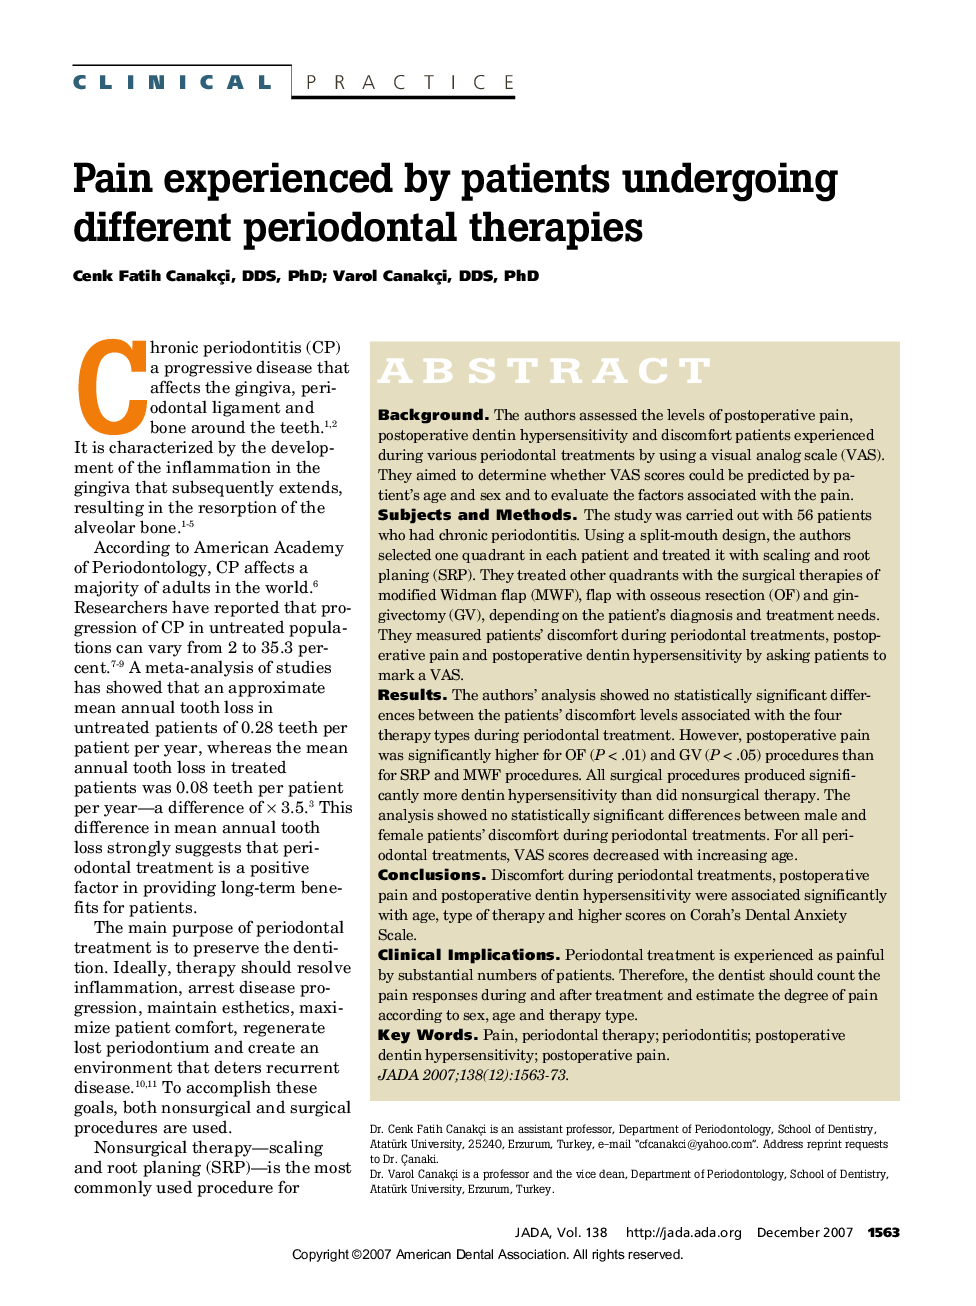 Pain Experienced by Patients Undergoing Different Periodontal Therapies